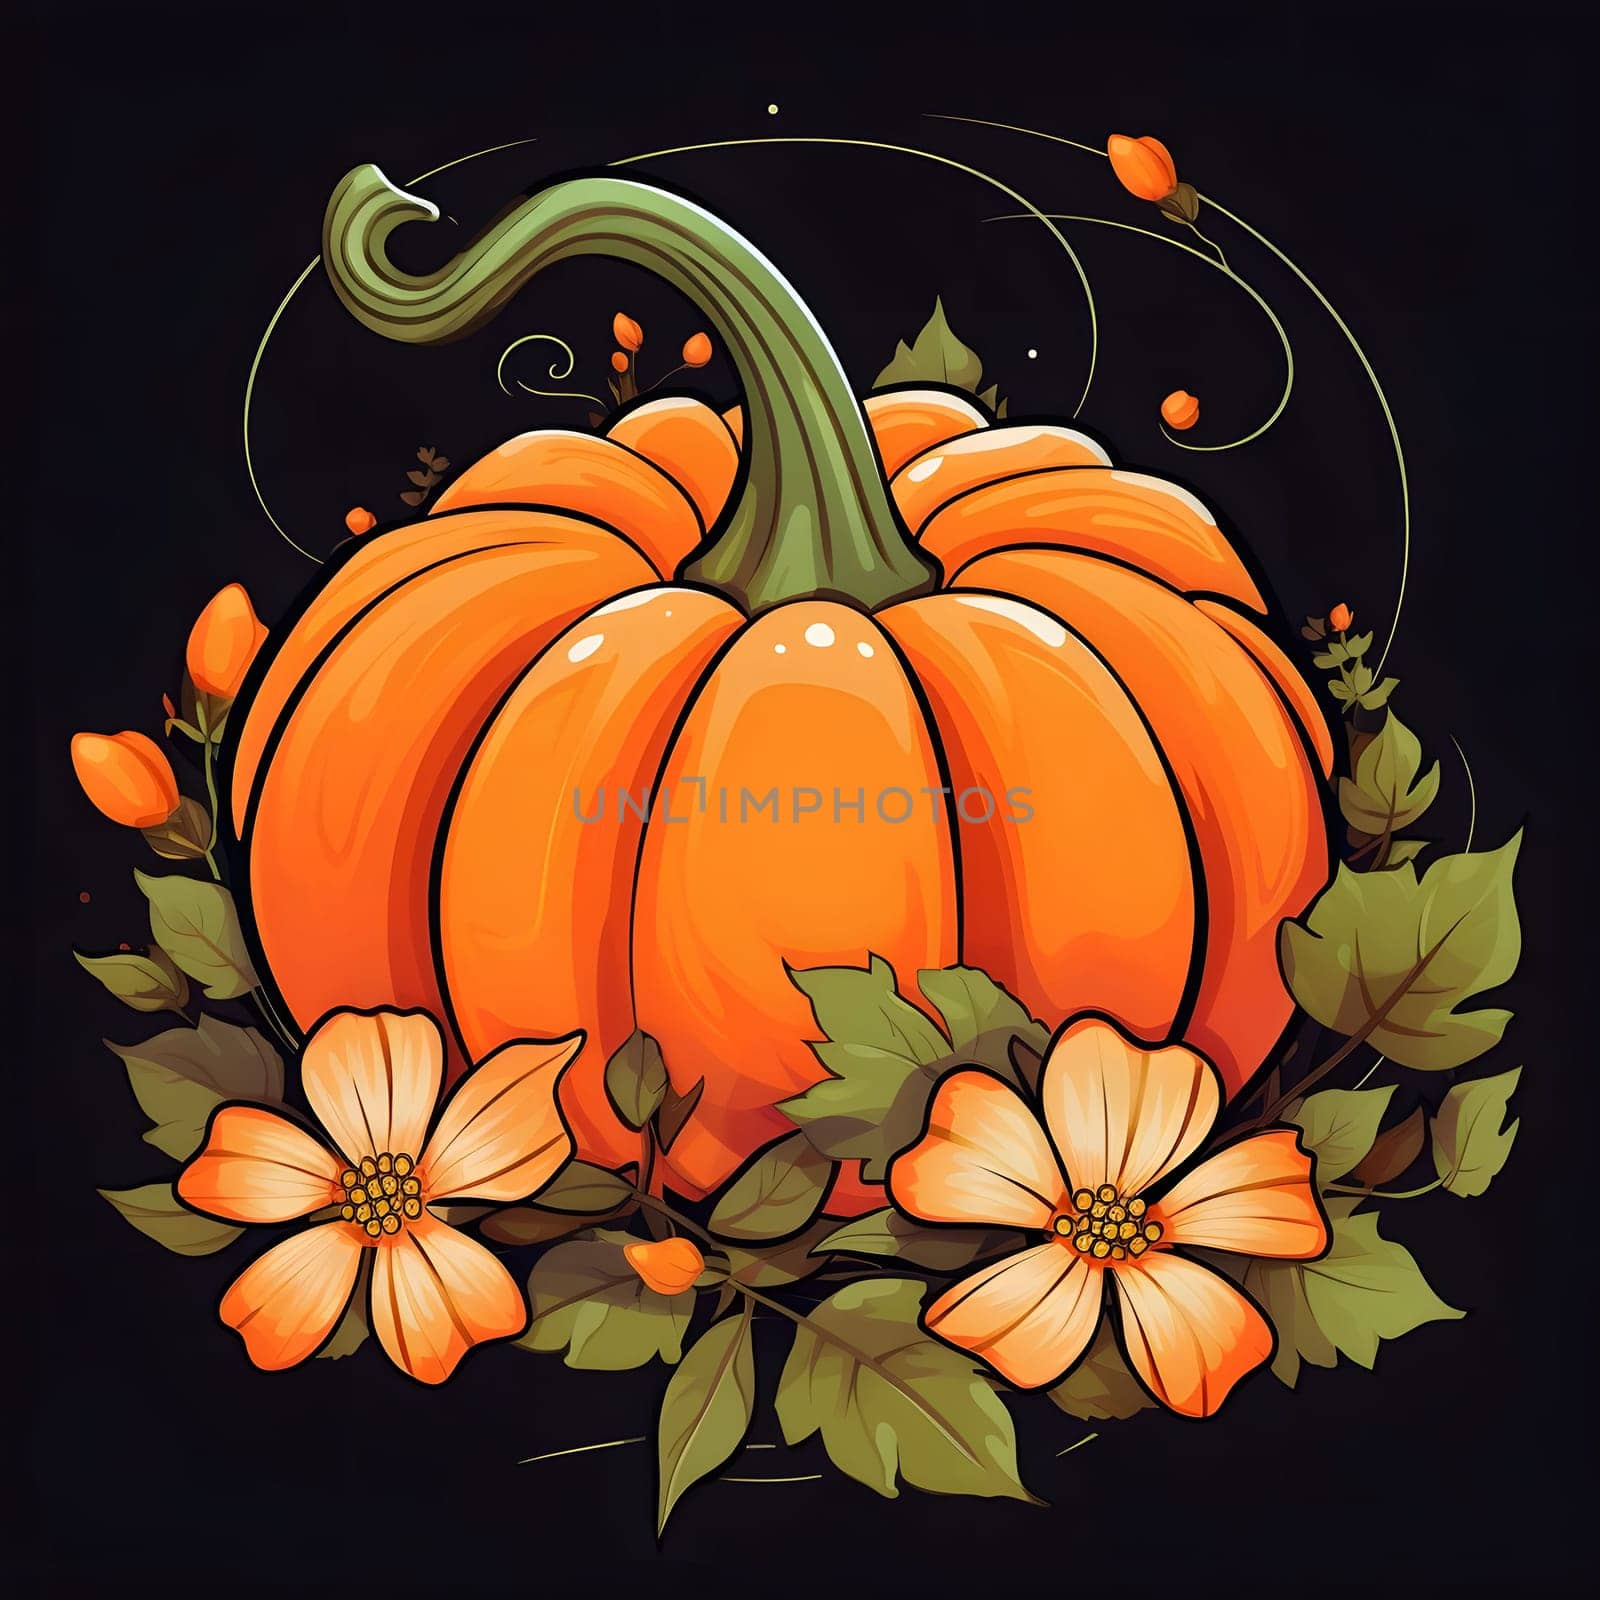 Pumpkin with flowers and leaves on a dark background. Pumpkin as a dish of thanksgiving for the harvest. by ThemesS